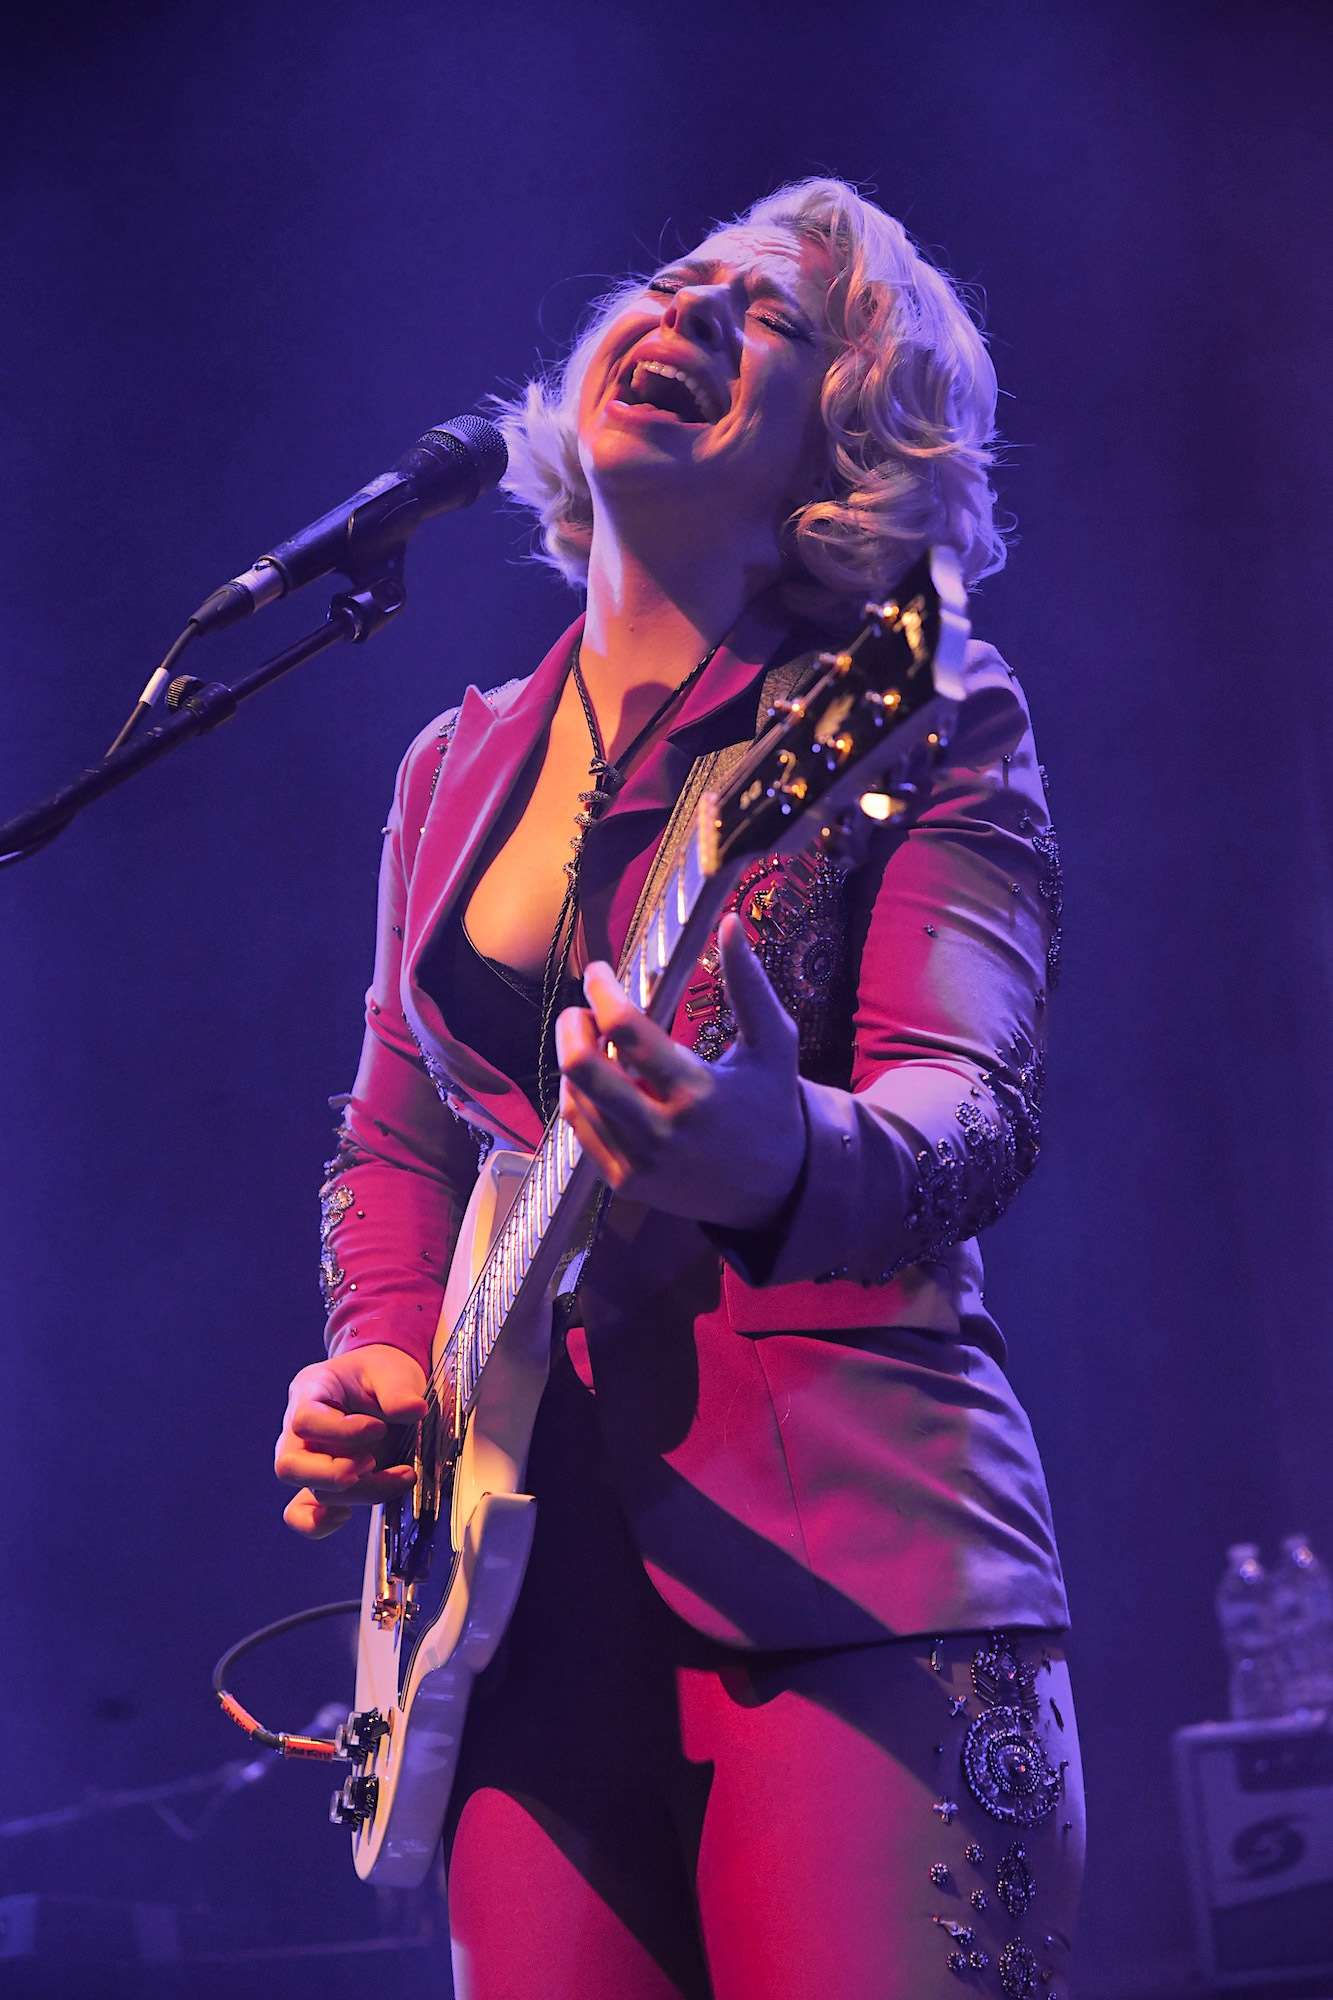 Samantha Fish Live at Park West [GALLERY] 7